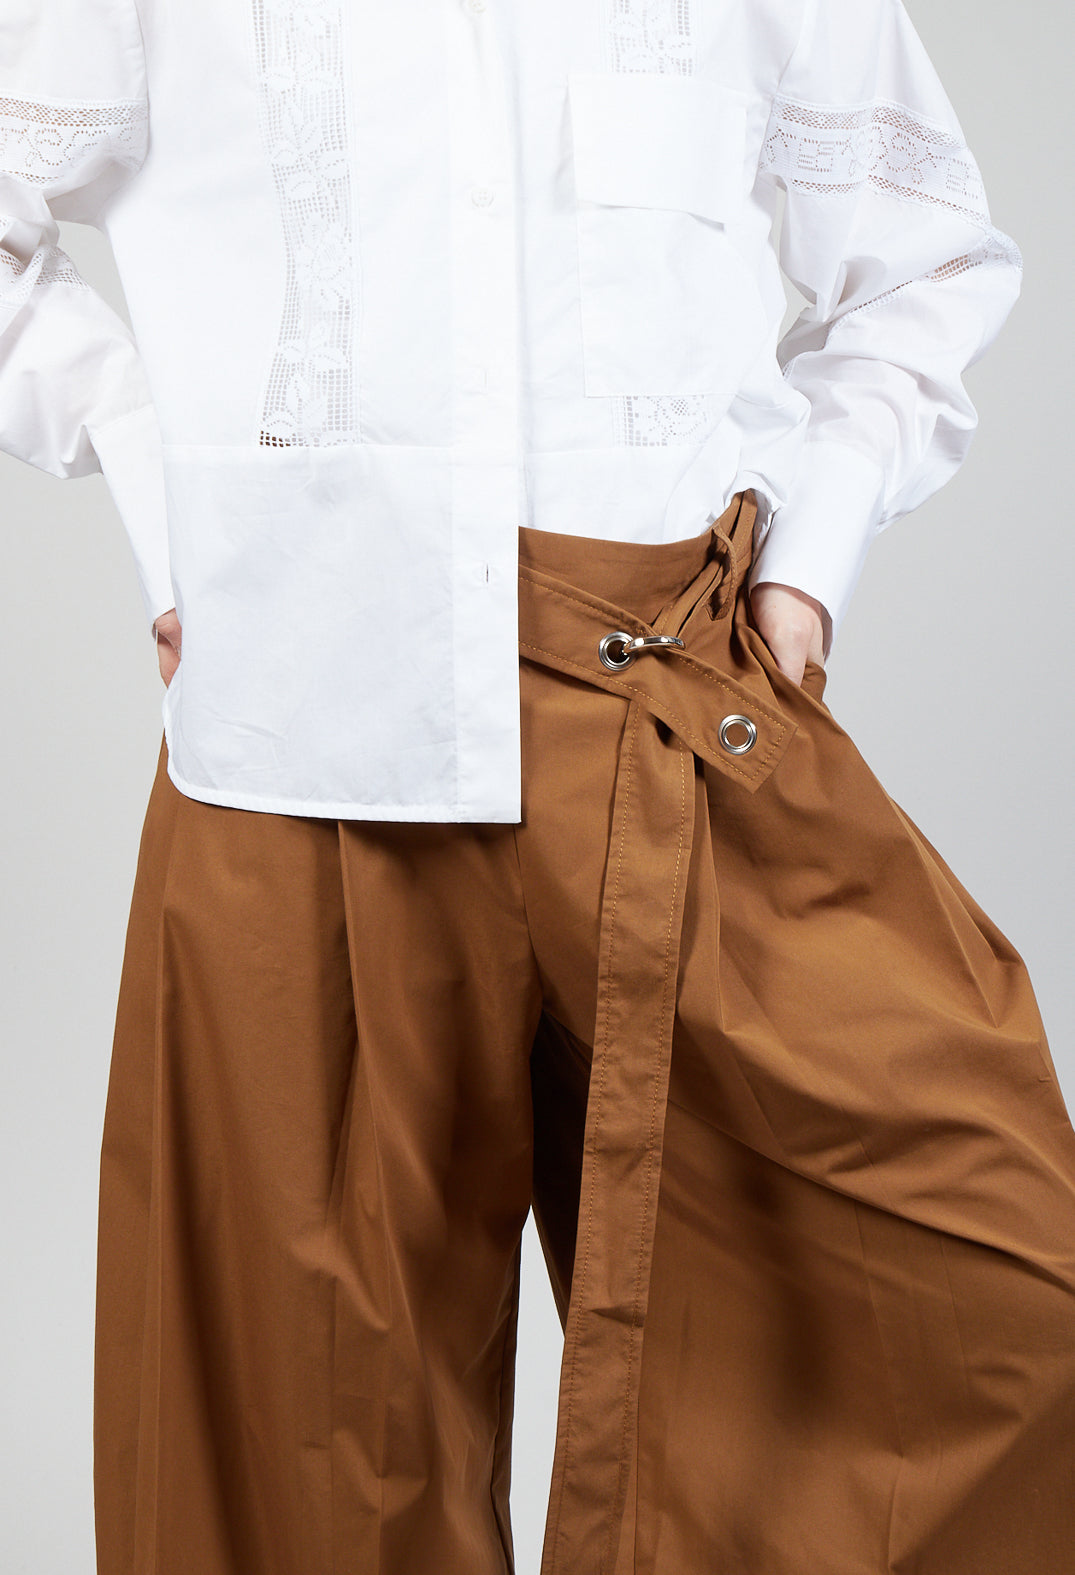 Pleated Wide Leg Trousers in Tan Brown